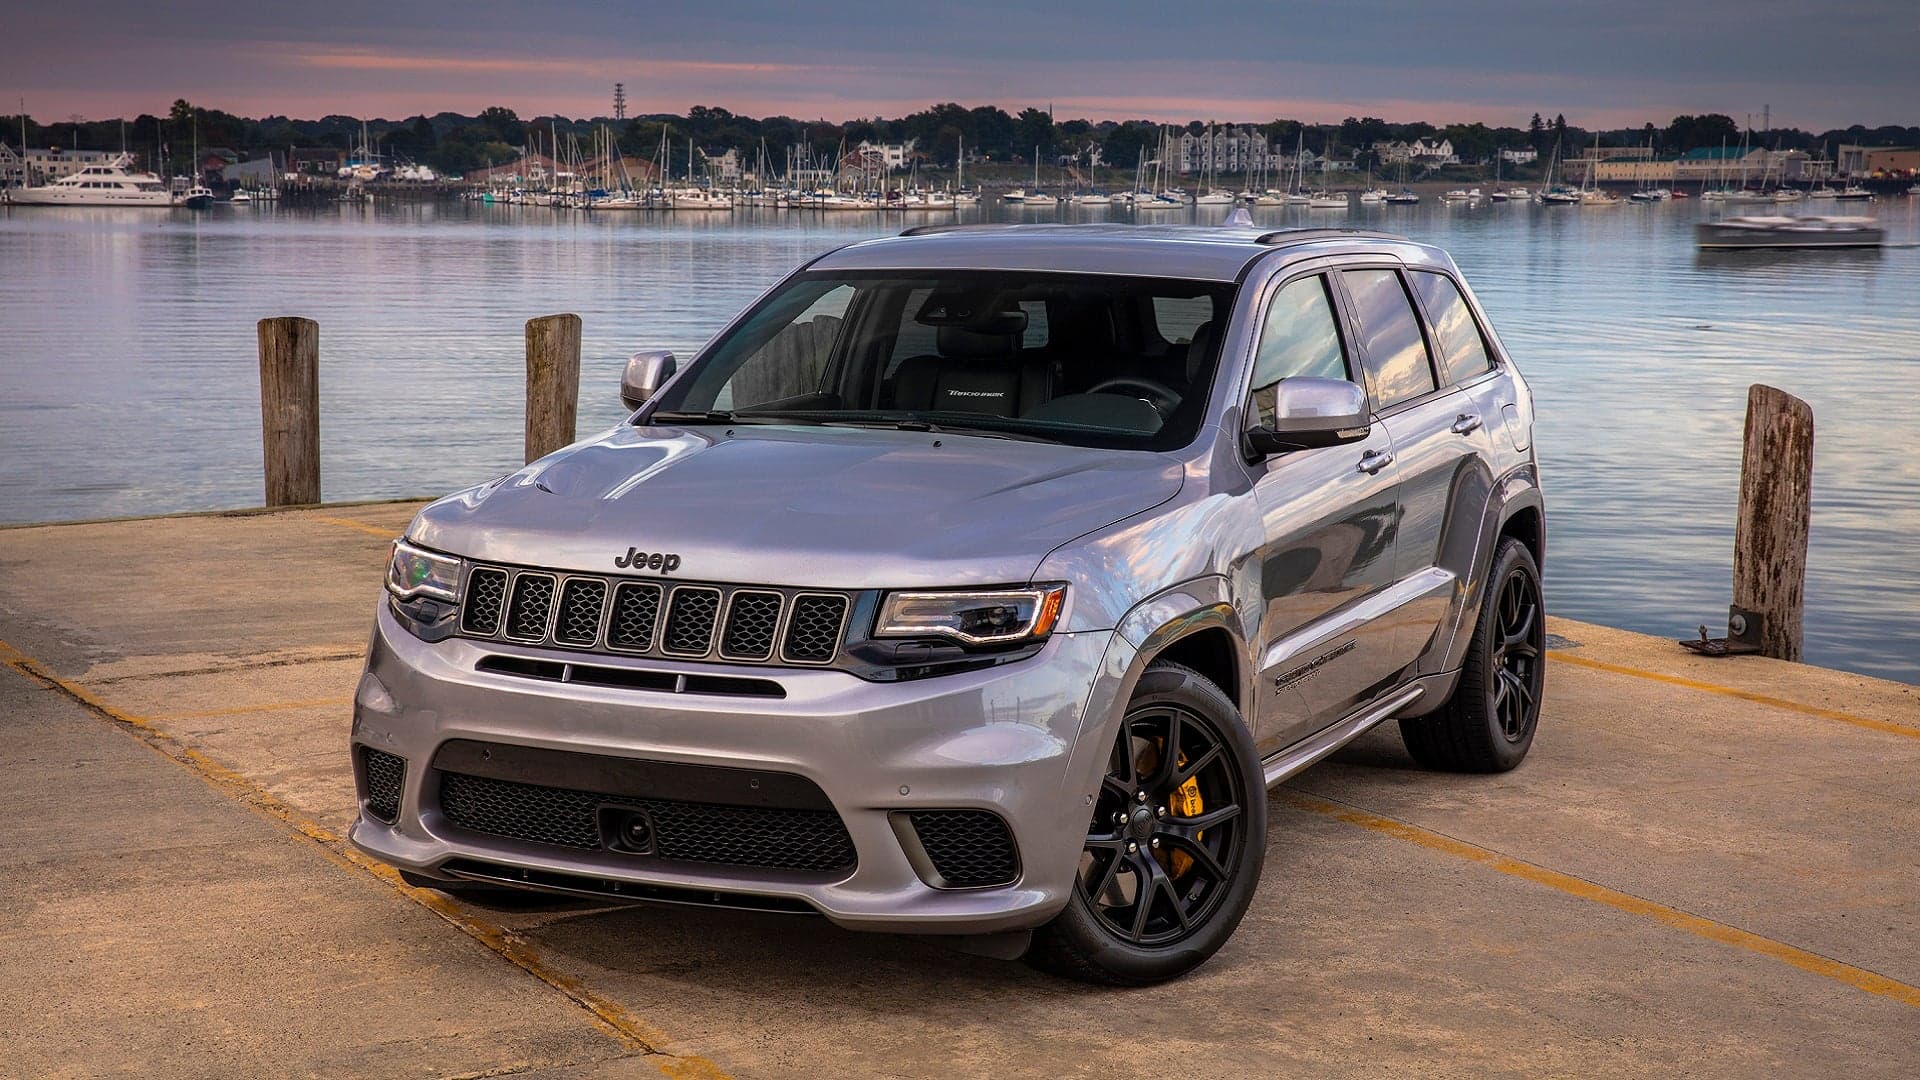 The 2019 Jeep Grand Cherokee Trackhawk Will Cost More Than $115,000 in the UK